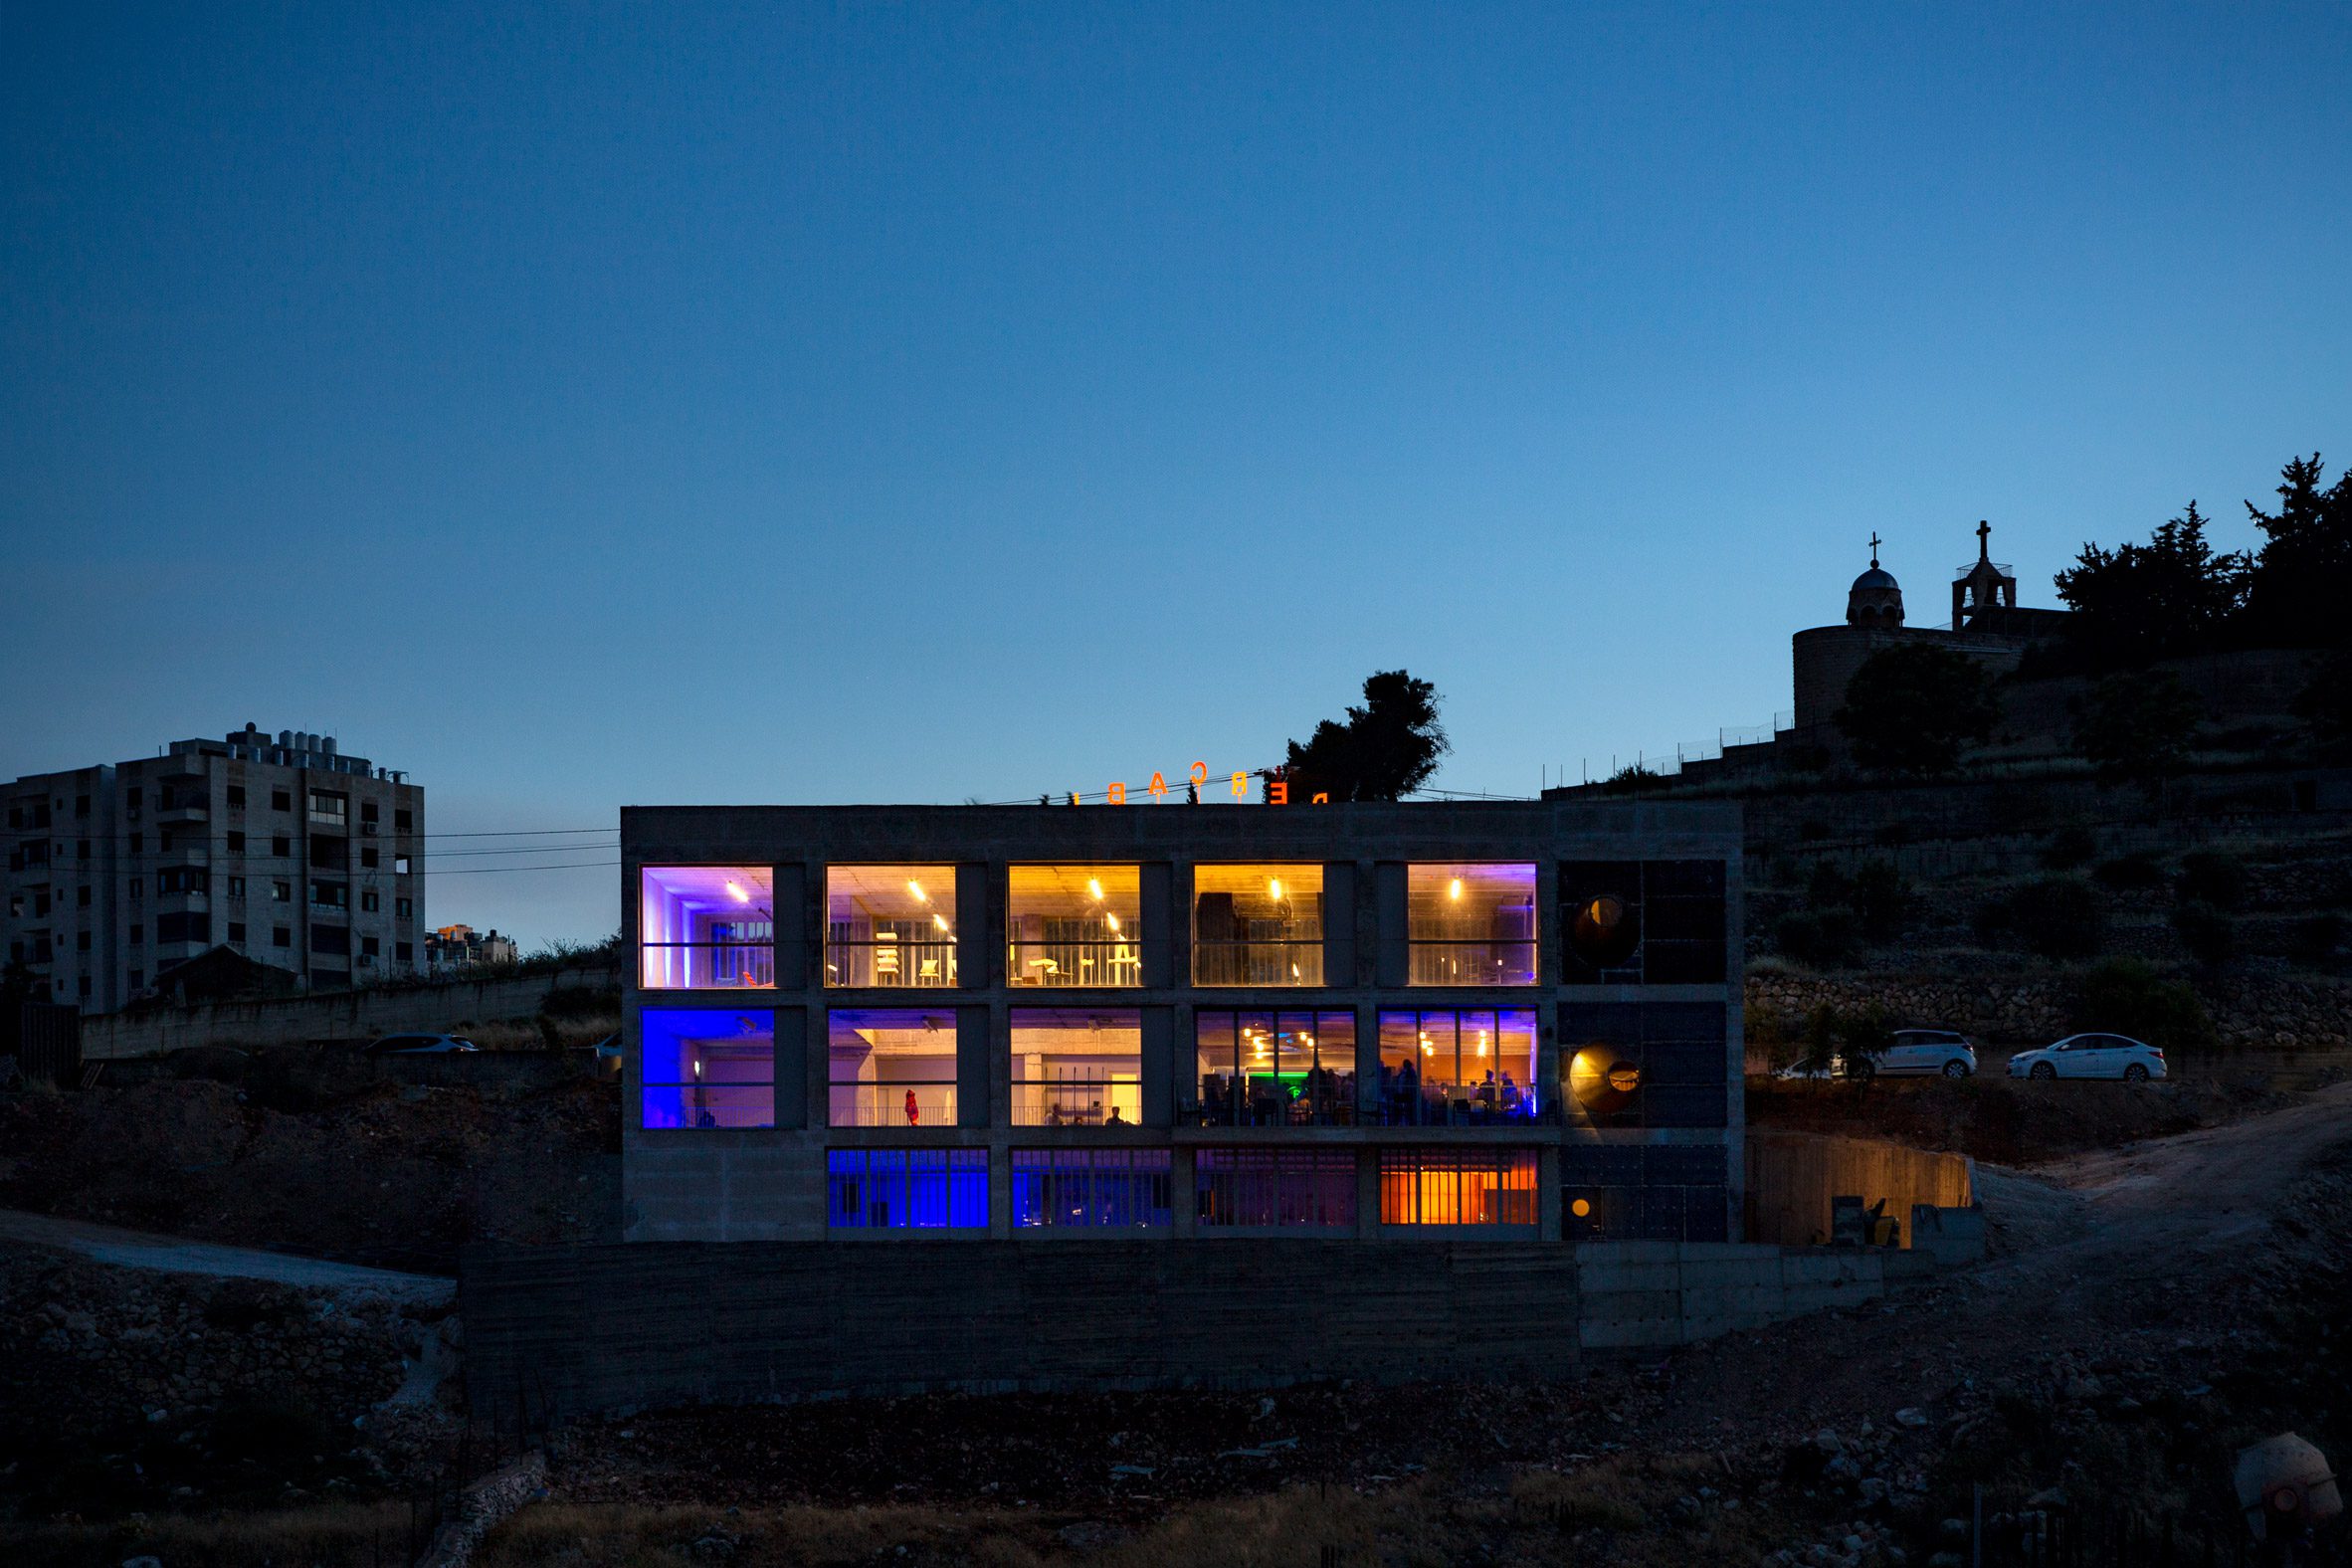 Photo of the Wonder Cabinet building with windows lit up in different colours at night from across the valley